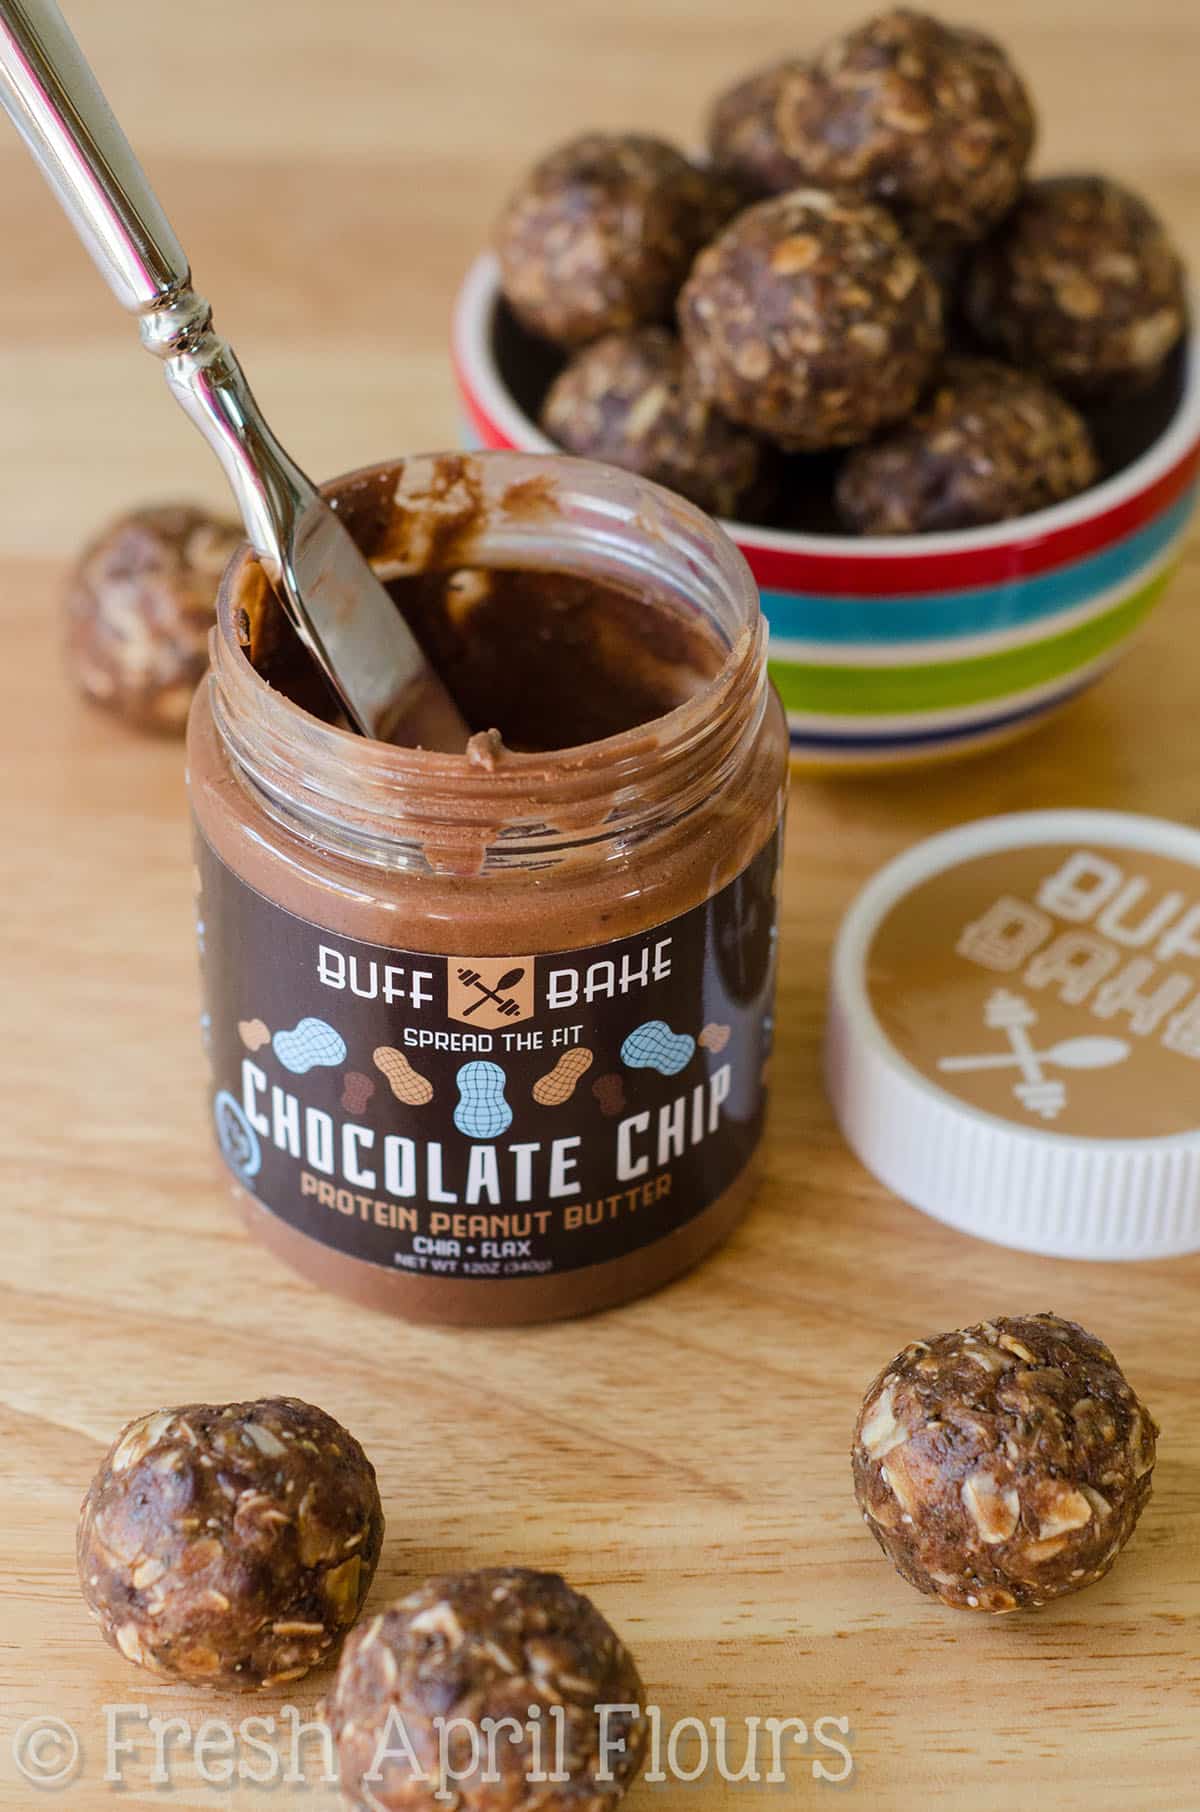 Chocolate Chip Energy Bites: Chocolate chip oatmeal bites loaded with high protein nut butter, flaxseed, and chia seeds to help fuel you on the go or aid in guilt-free snacking!